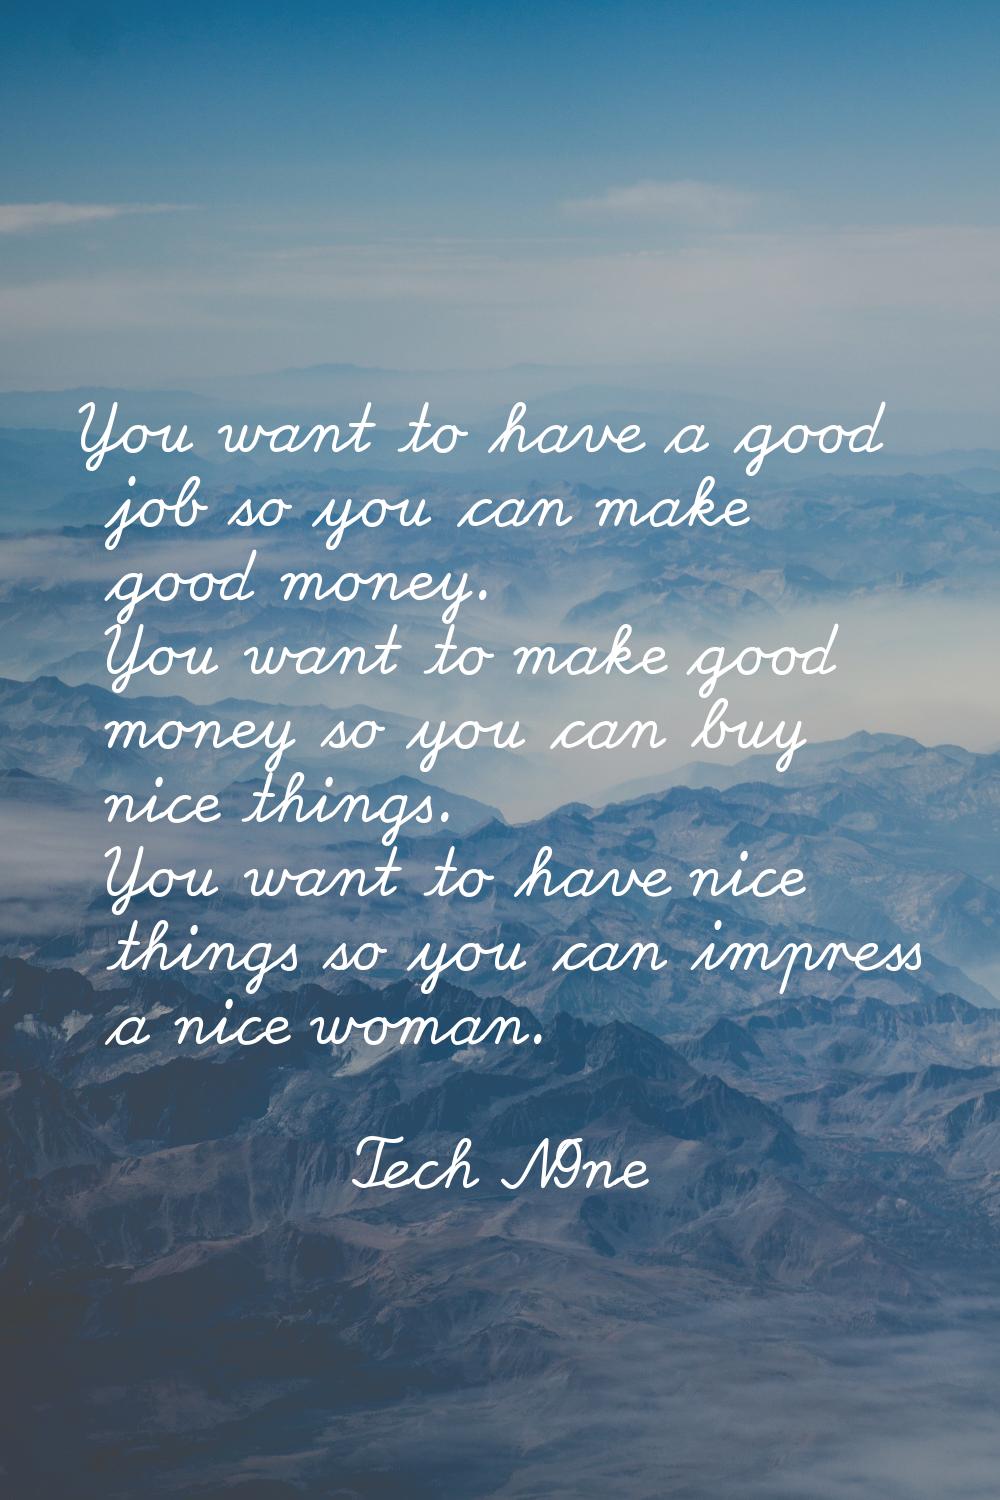 You want to have a good job so you can make good money. You want to make good money so you can buy 